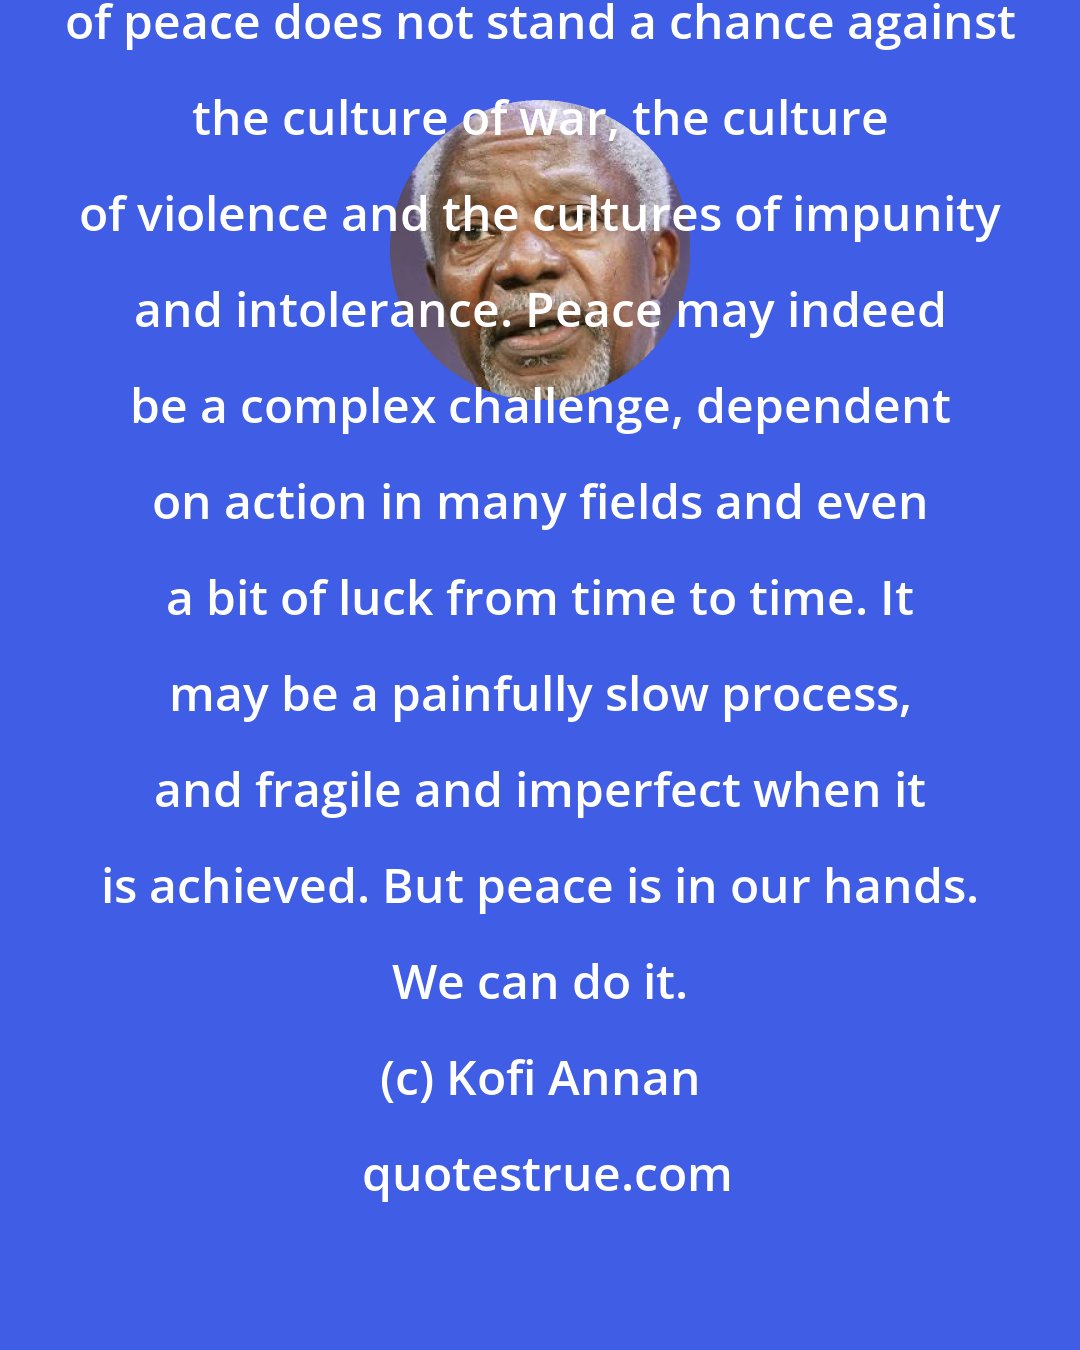 Kofi Annan: It may seem sometimes as if a culture of peace does not stand a chance against the culture of war, the culture of violence and the cultures of impunity and intolerance. Peace may indeed be a complex challenge, dependent on action in many fields and even a bit of luck from time to time. It may be a painfully slow process, and fragile and imperfect when it is achieved. But peace is in our hands. We can do it.